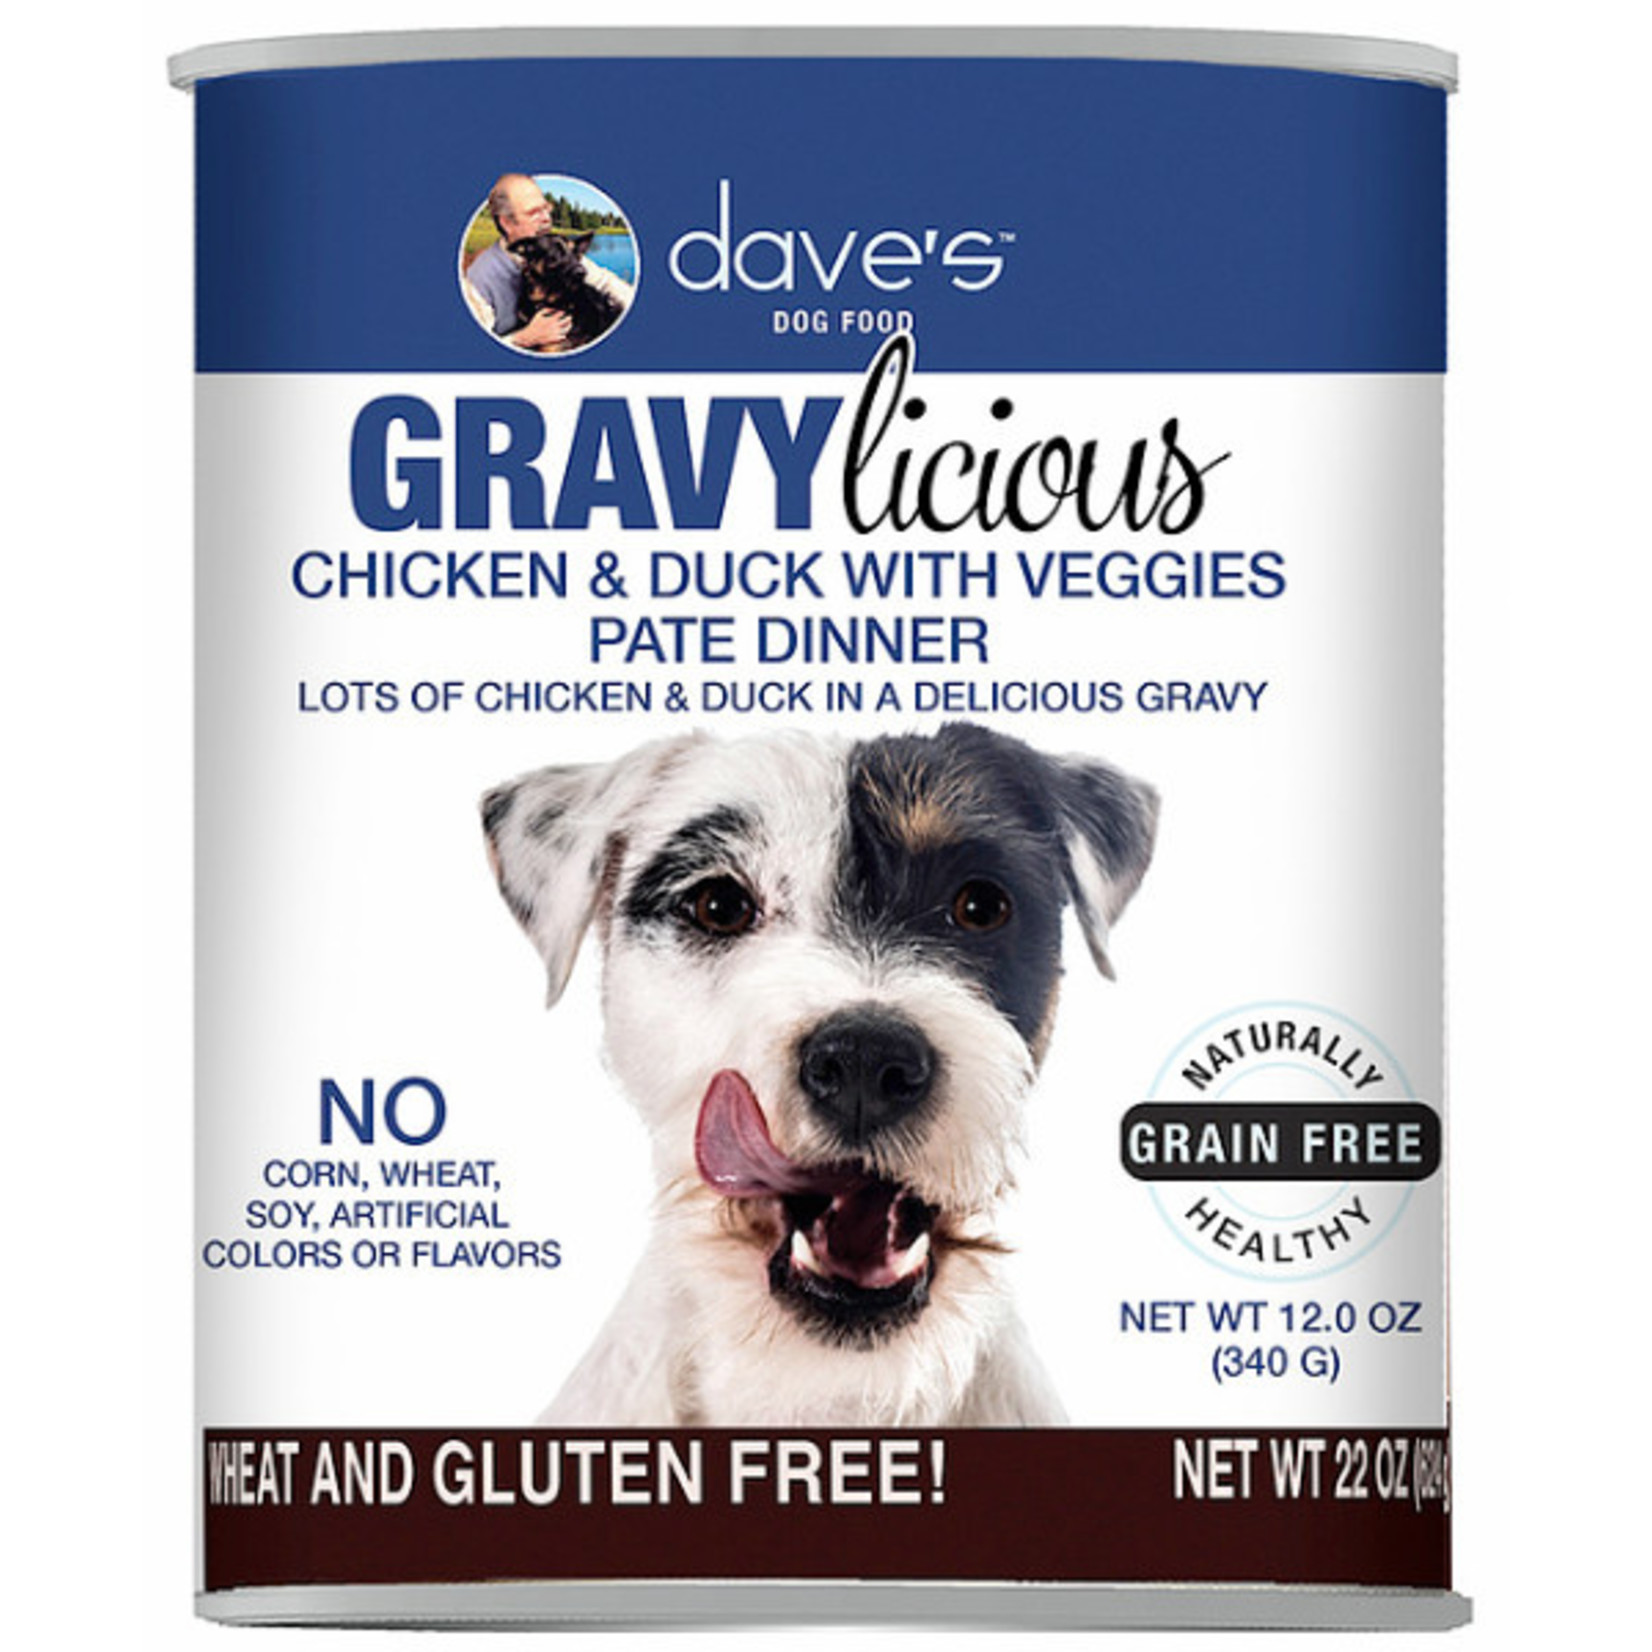 Daves Pet Food Dave's Wet Dog Food Gravylicious Chicken and Duck with Veggies Pate Dinner 12oz Can Grain Free